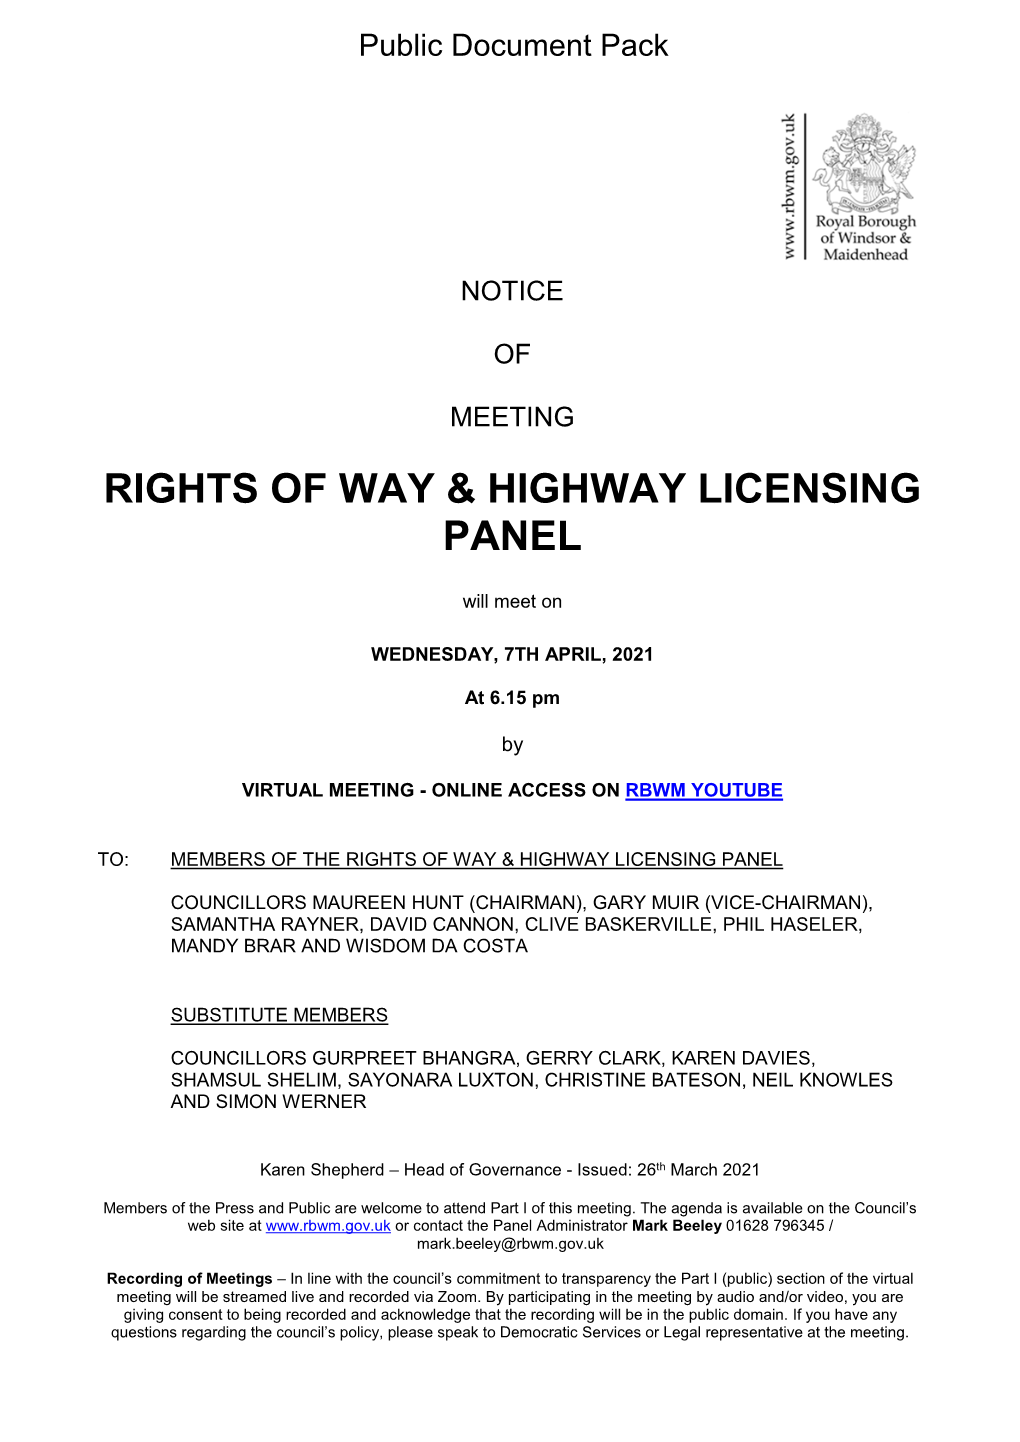 (Public Pack)Agenda Document for Rights of Way & Highway